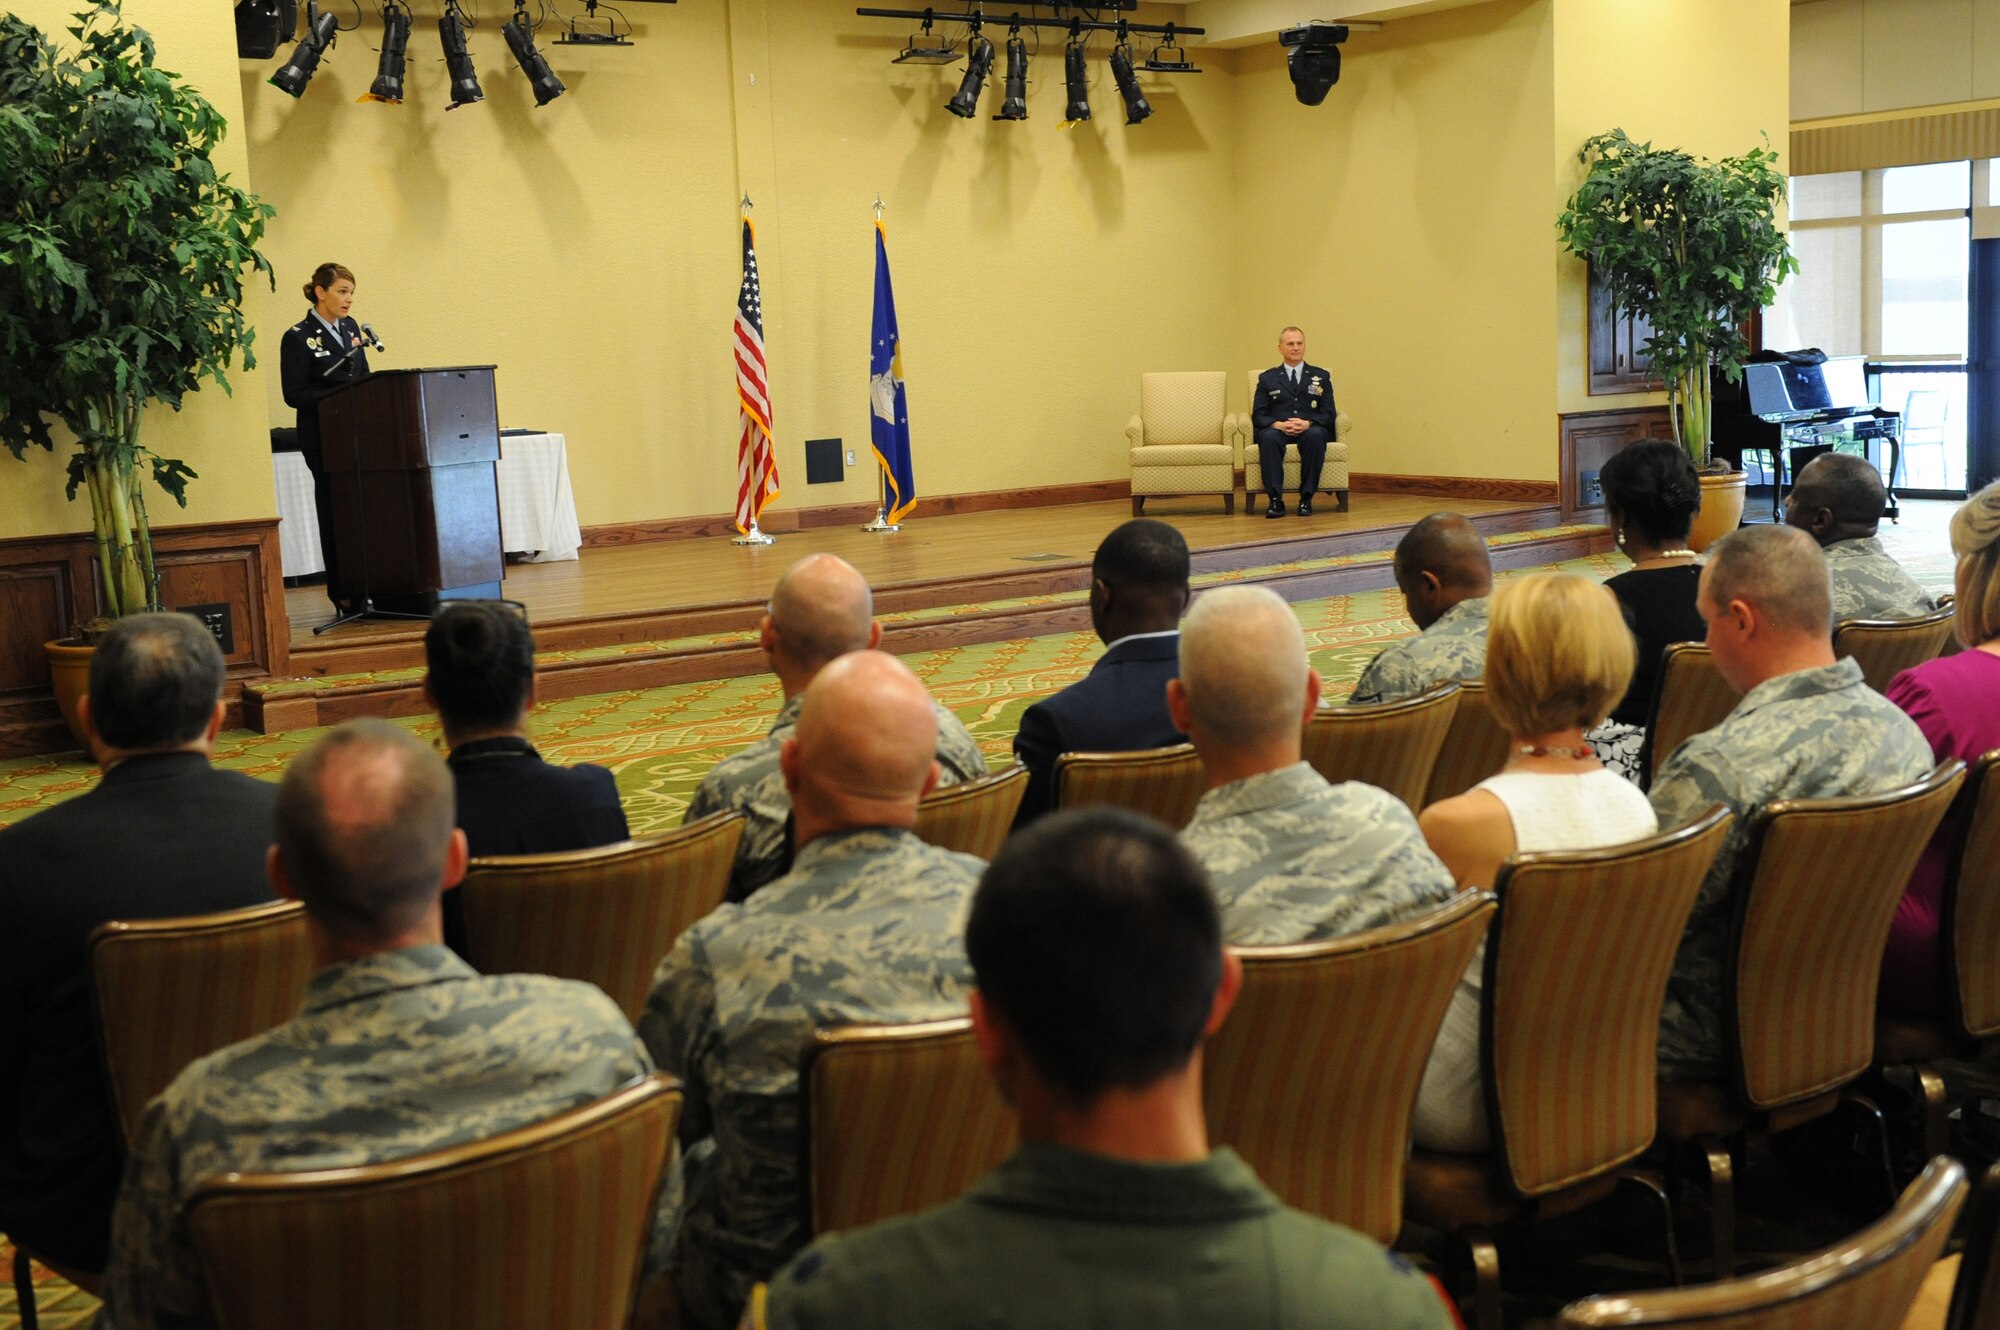 Col. Michele Edmondson, 81st Training Wing commander, delivers remarks during the retirement ceremony for Col. Dennis Scarborough, 81st TRW vice commander, at the Bay Breeze Event Center June 28, 2016, on Keesler Air Force Base, Miss. Scarborough retired with 27 years of military service. He has served multiple tours as an F-15C instructor and evaluator and has held positions in the fields of defense policy, operational plans, safety and aircraft maintenance. He has commanded at the squadron level and served as an operations group deputy commander. (U.S. Air Force photo by Kemberly Groue/Released)